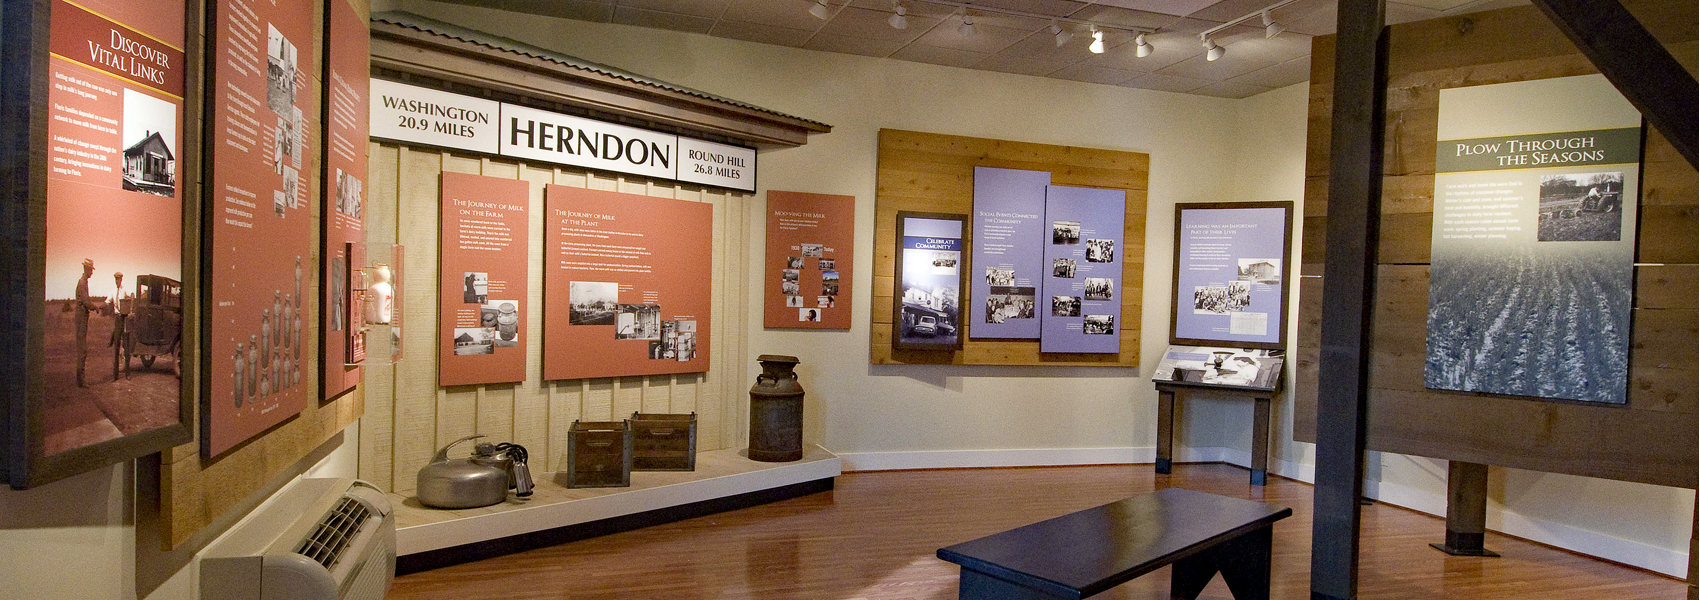 The exhibit inside the Frying Pan visitor center